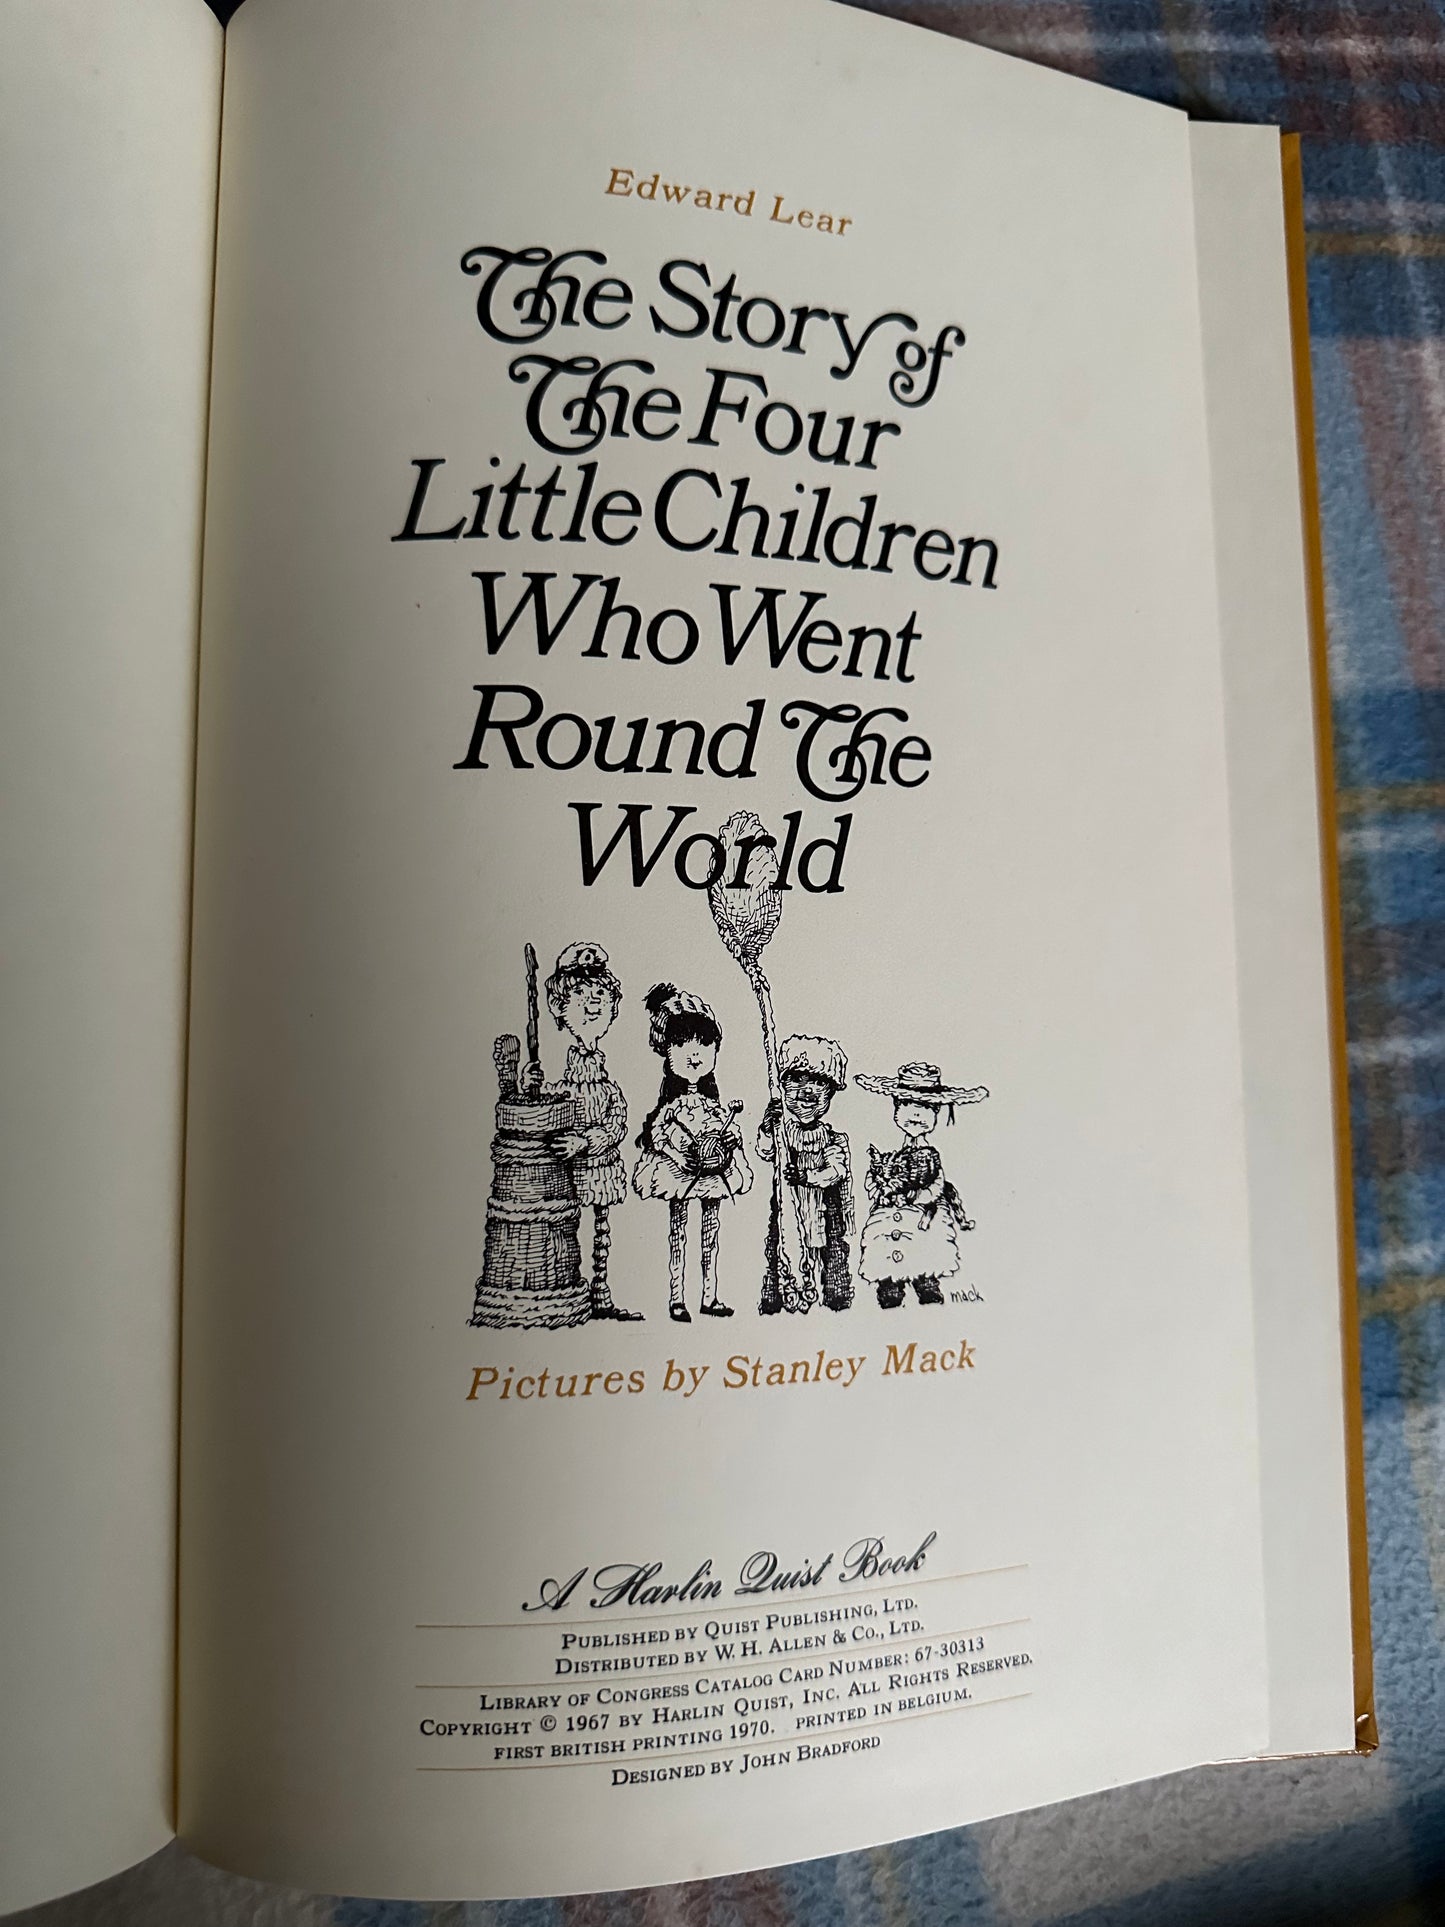 1970*1st* The Story Of The Four Little Children Who Went Around The World - Edward Lear(Stanley Mack images) published by Harlin Quist. W.H. Allen Distrib UK